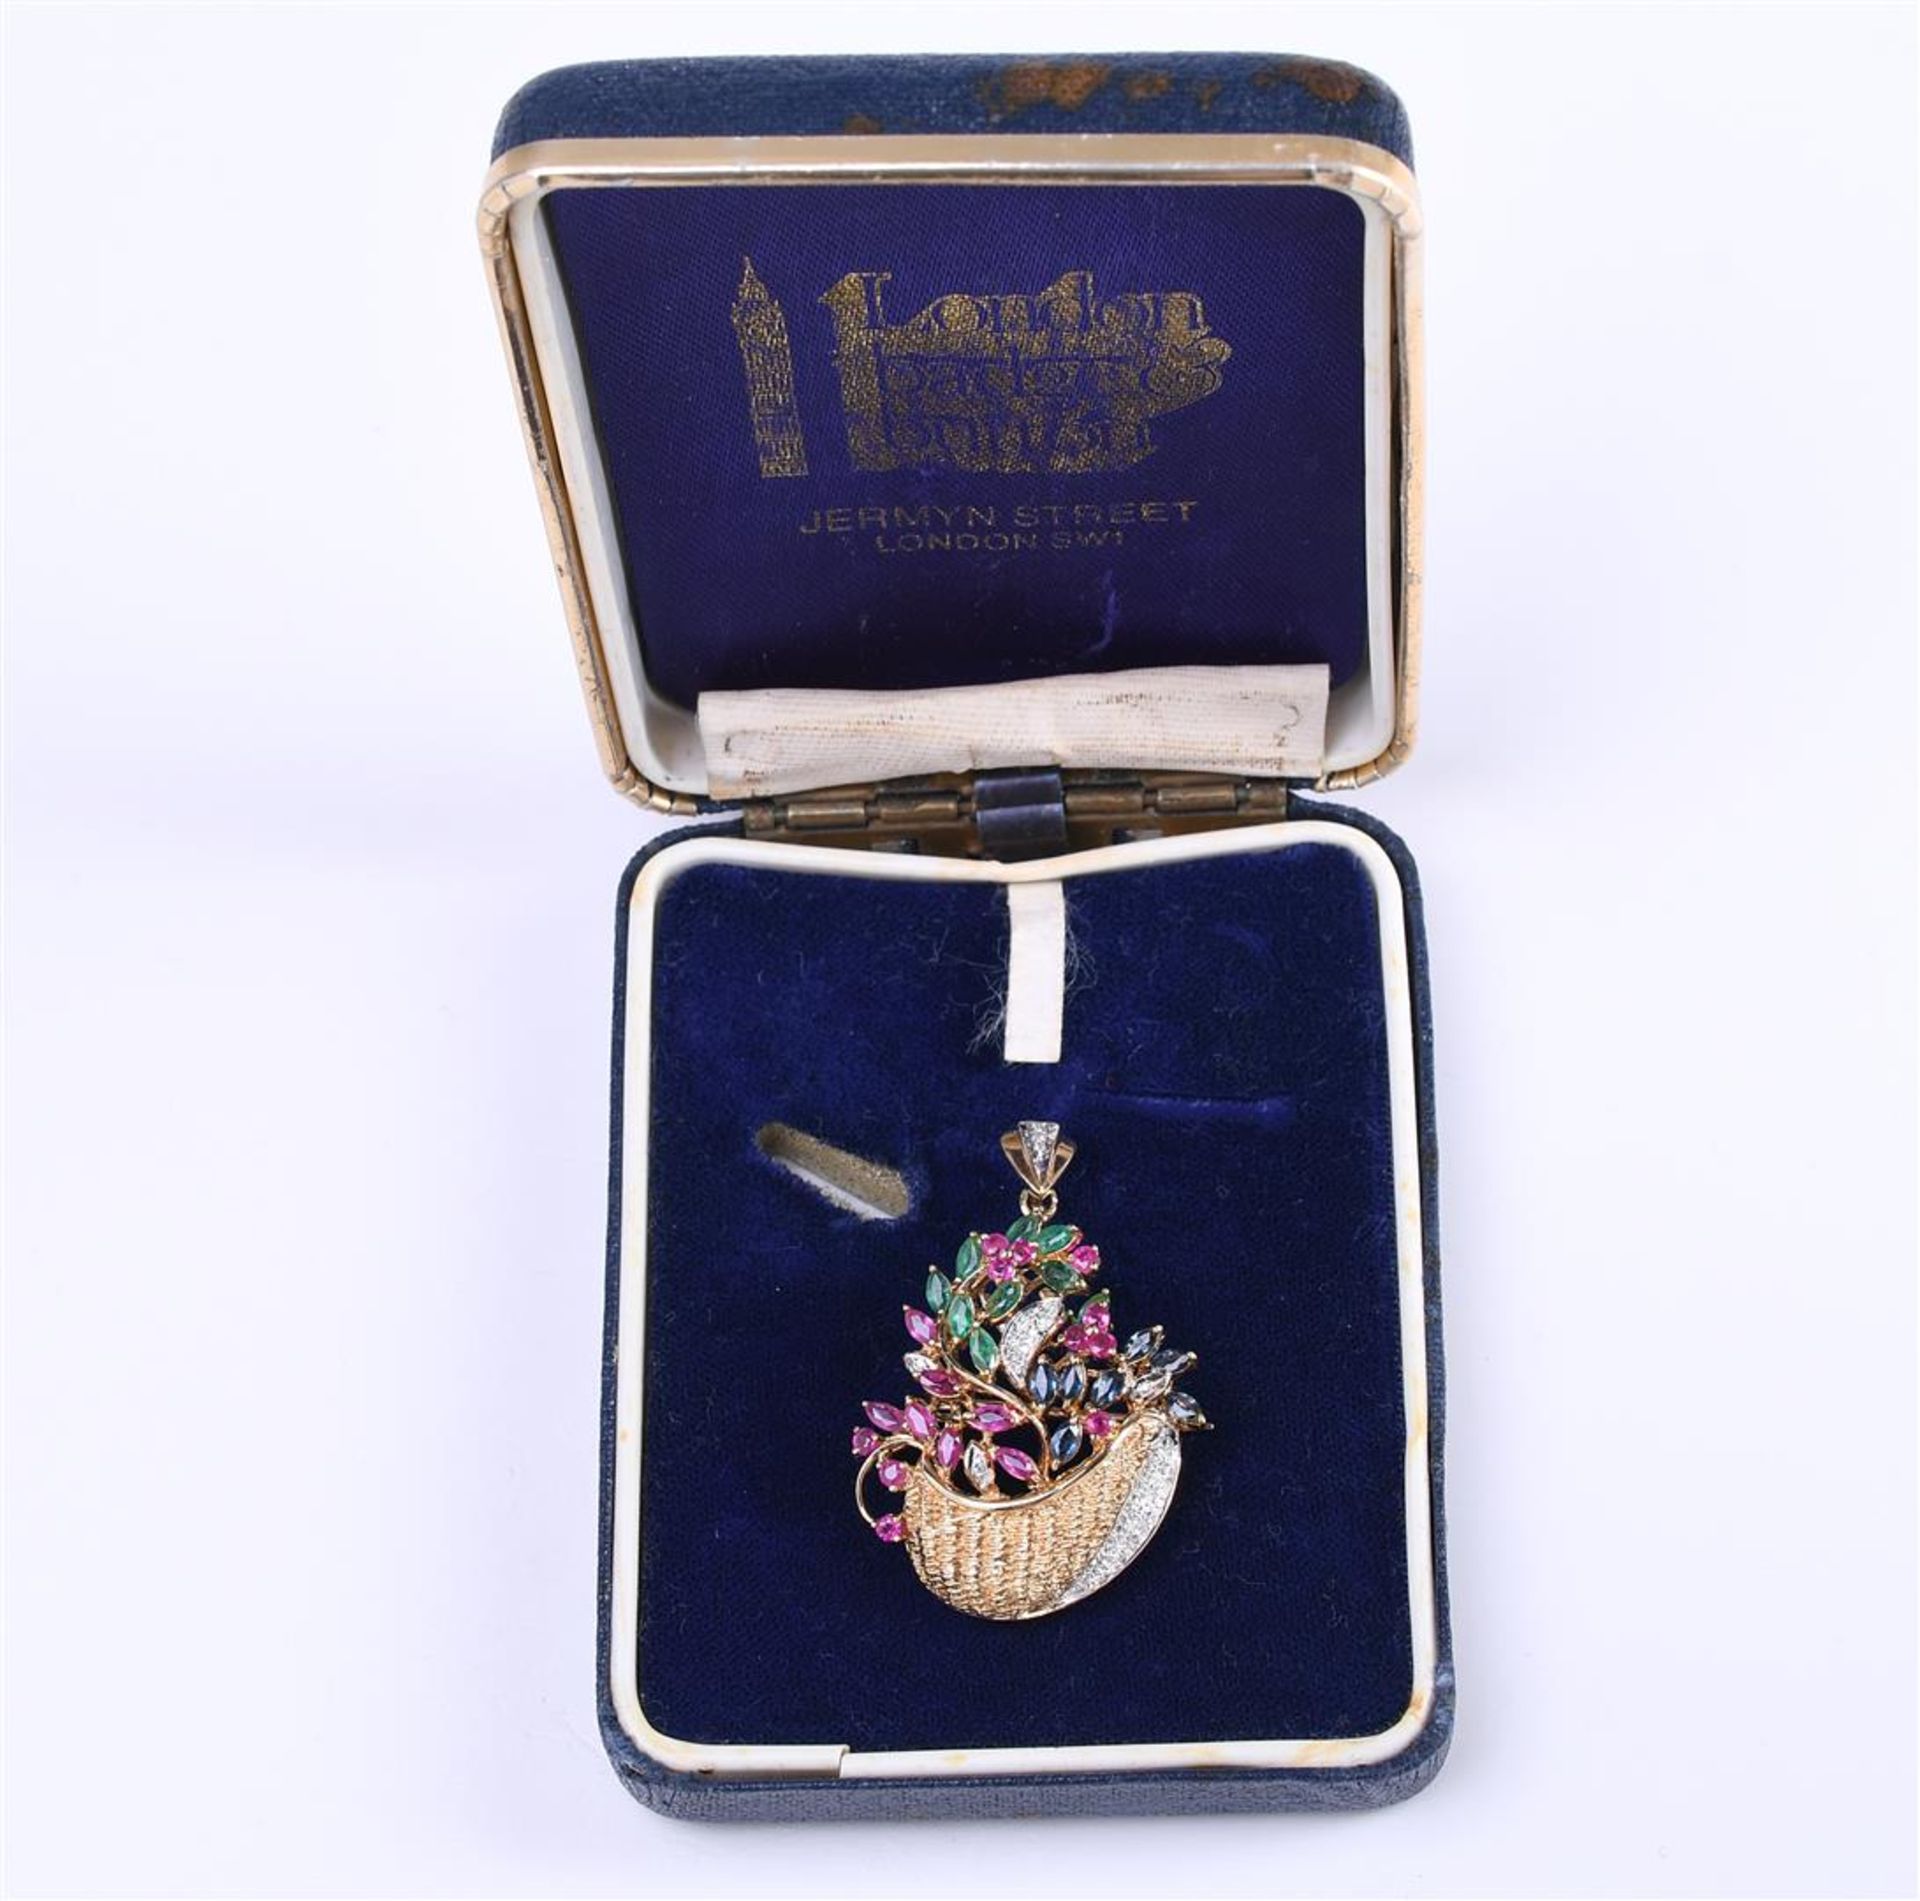 14 carat yellow gold ladies brooch and pendant combination of a flower basket (1960s-70s) - Image 6 of 6